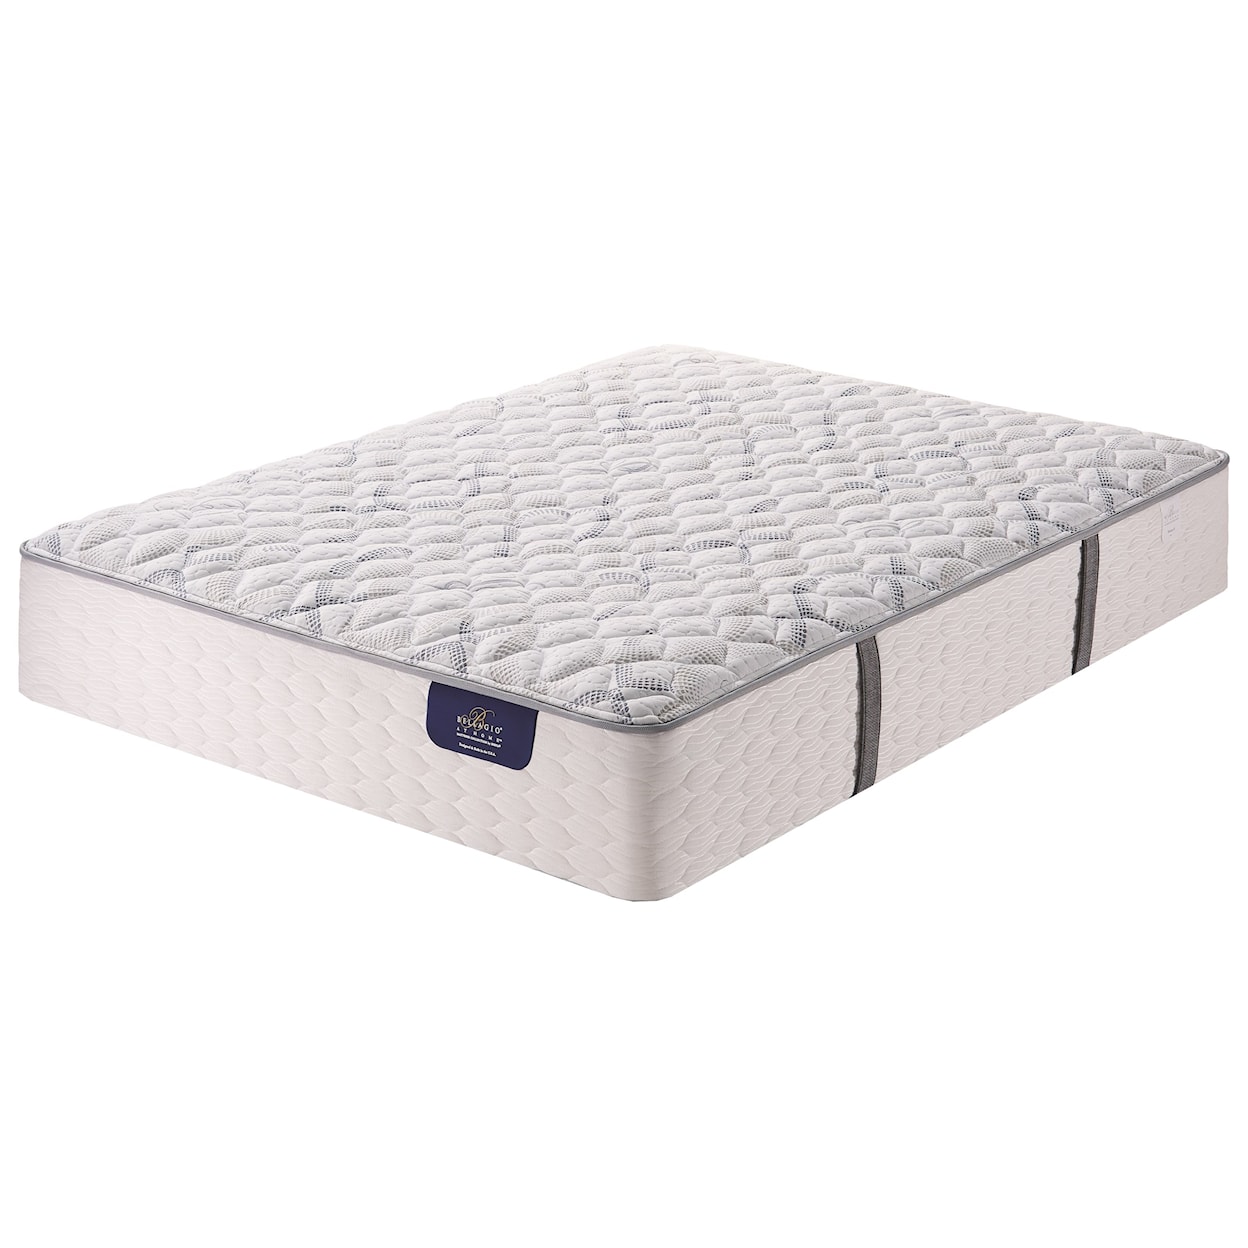 Serta Bellagio Briaza II Extra Firm Cal King Extra Firm Pocketed Coil Mattress